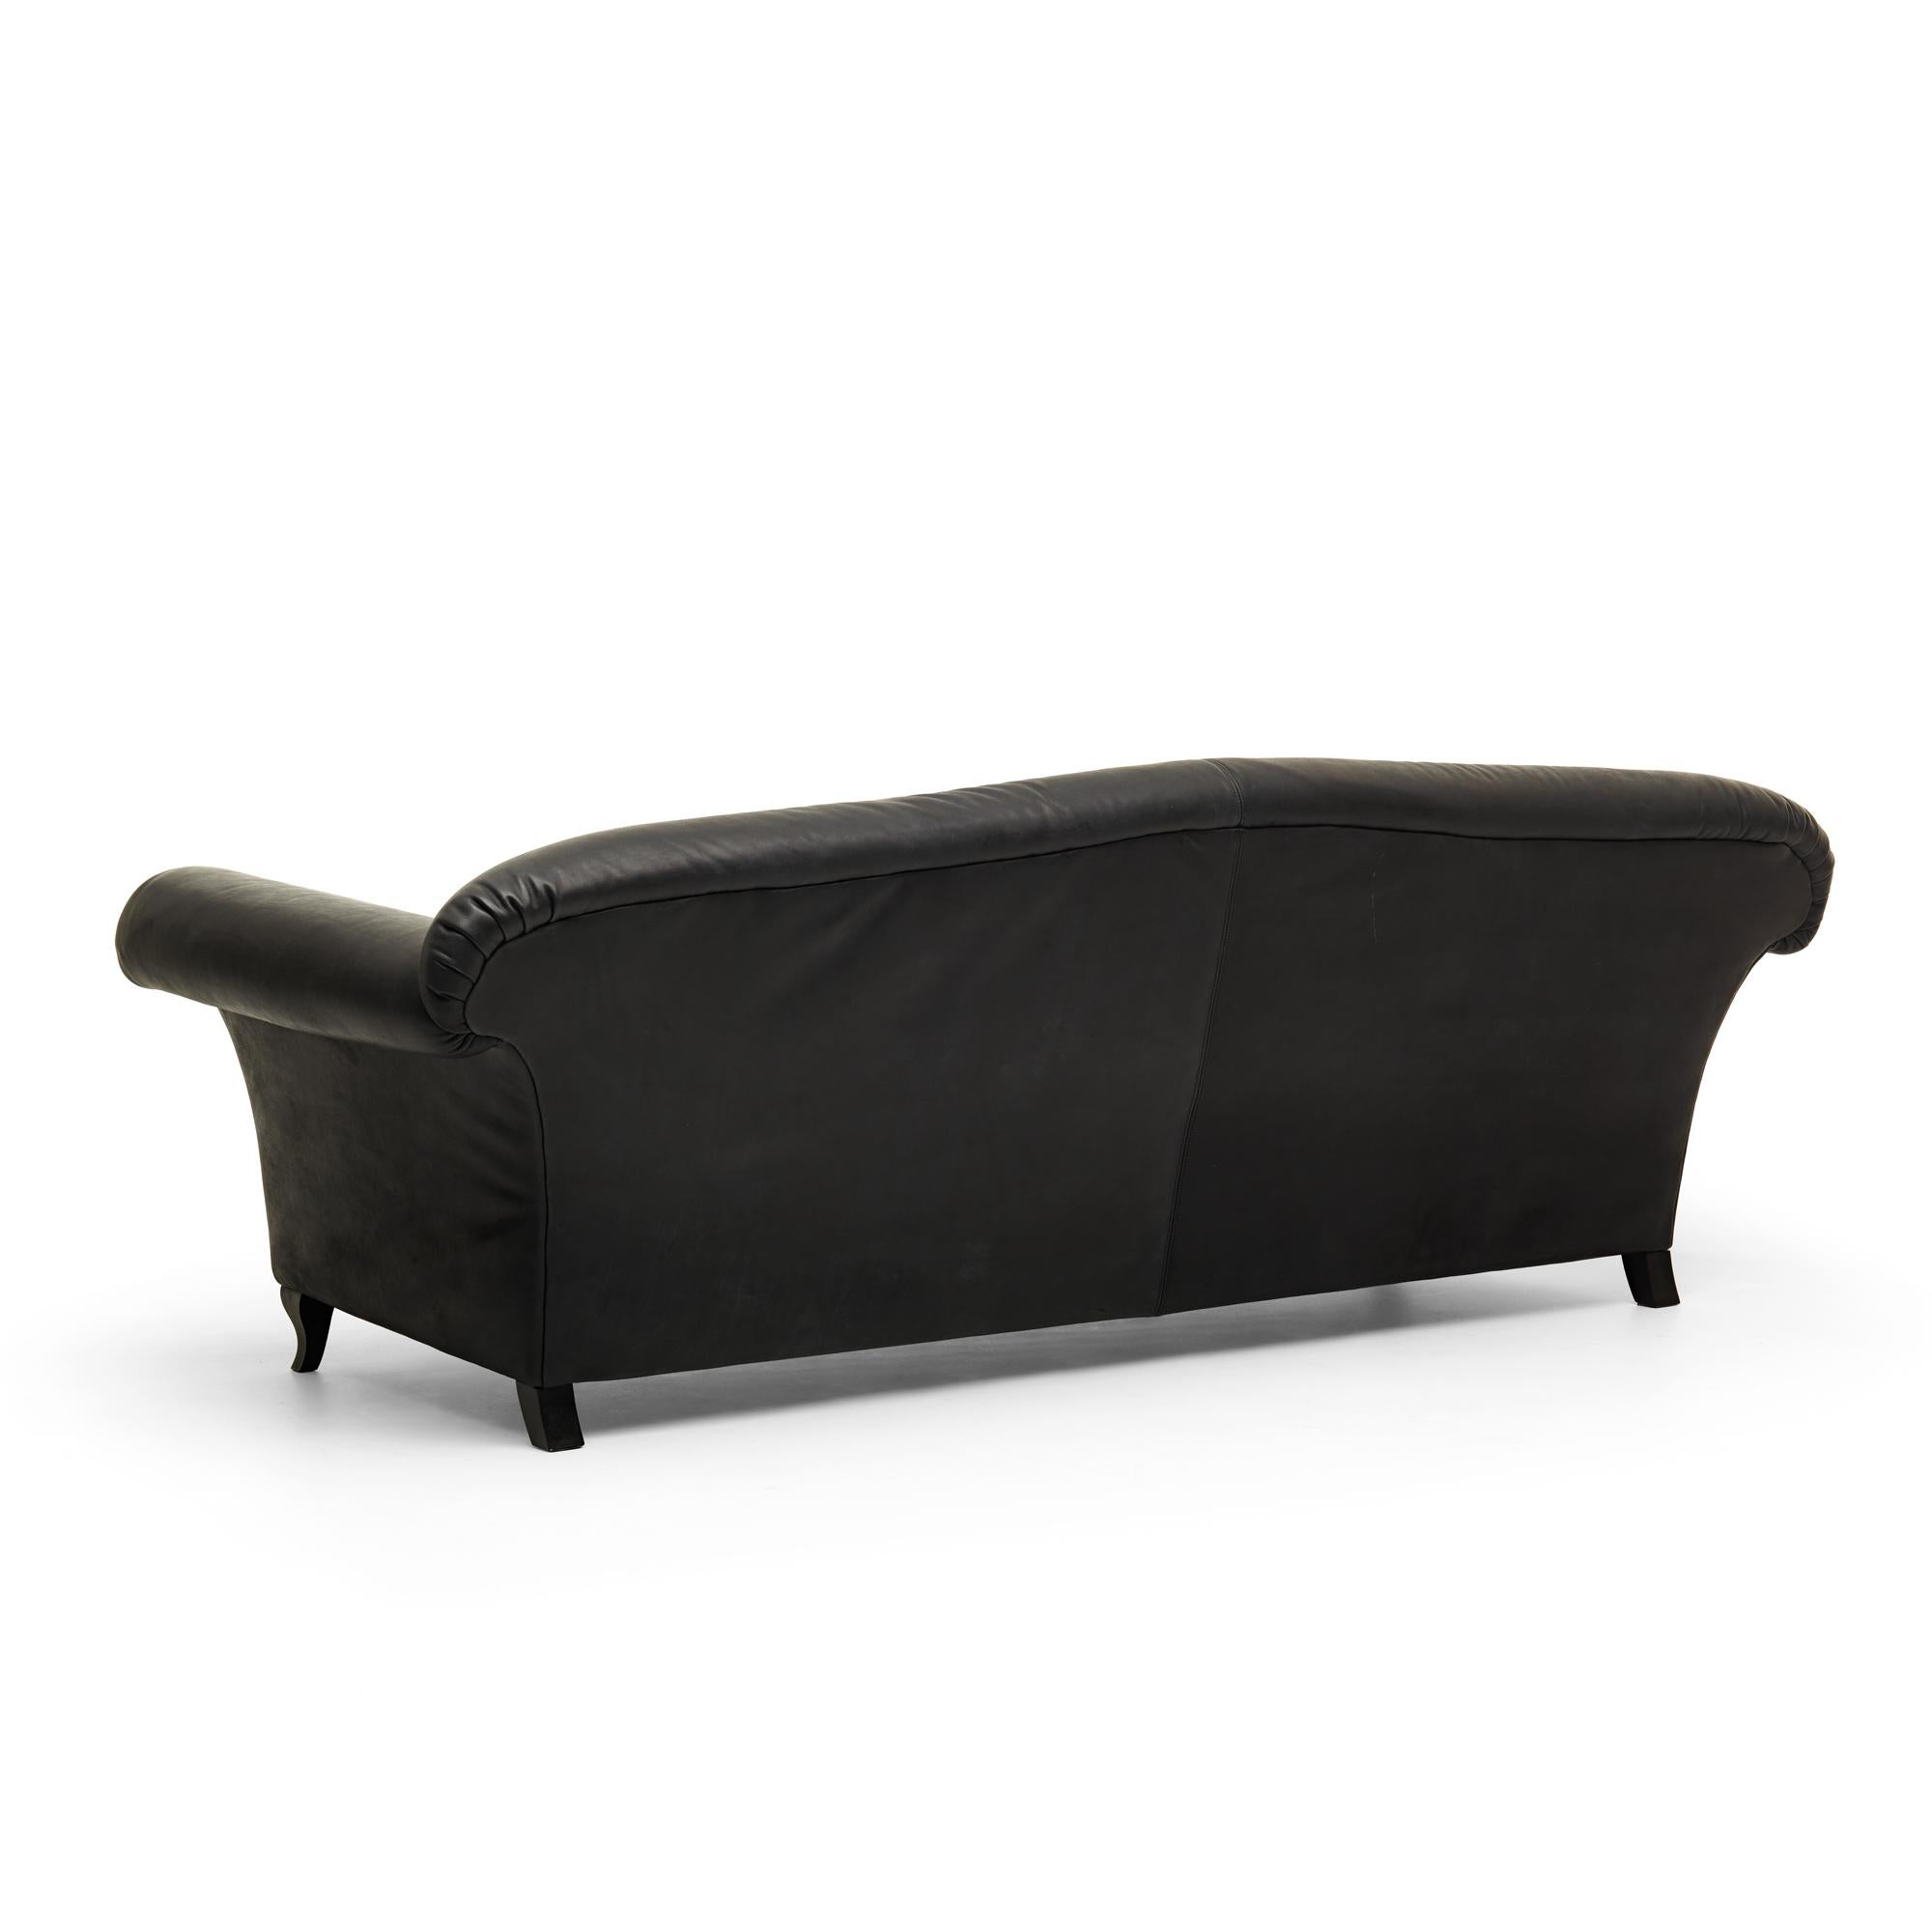 Italian 21st Century Modern Sofa Upholstered In Leather For Sale